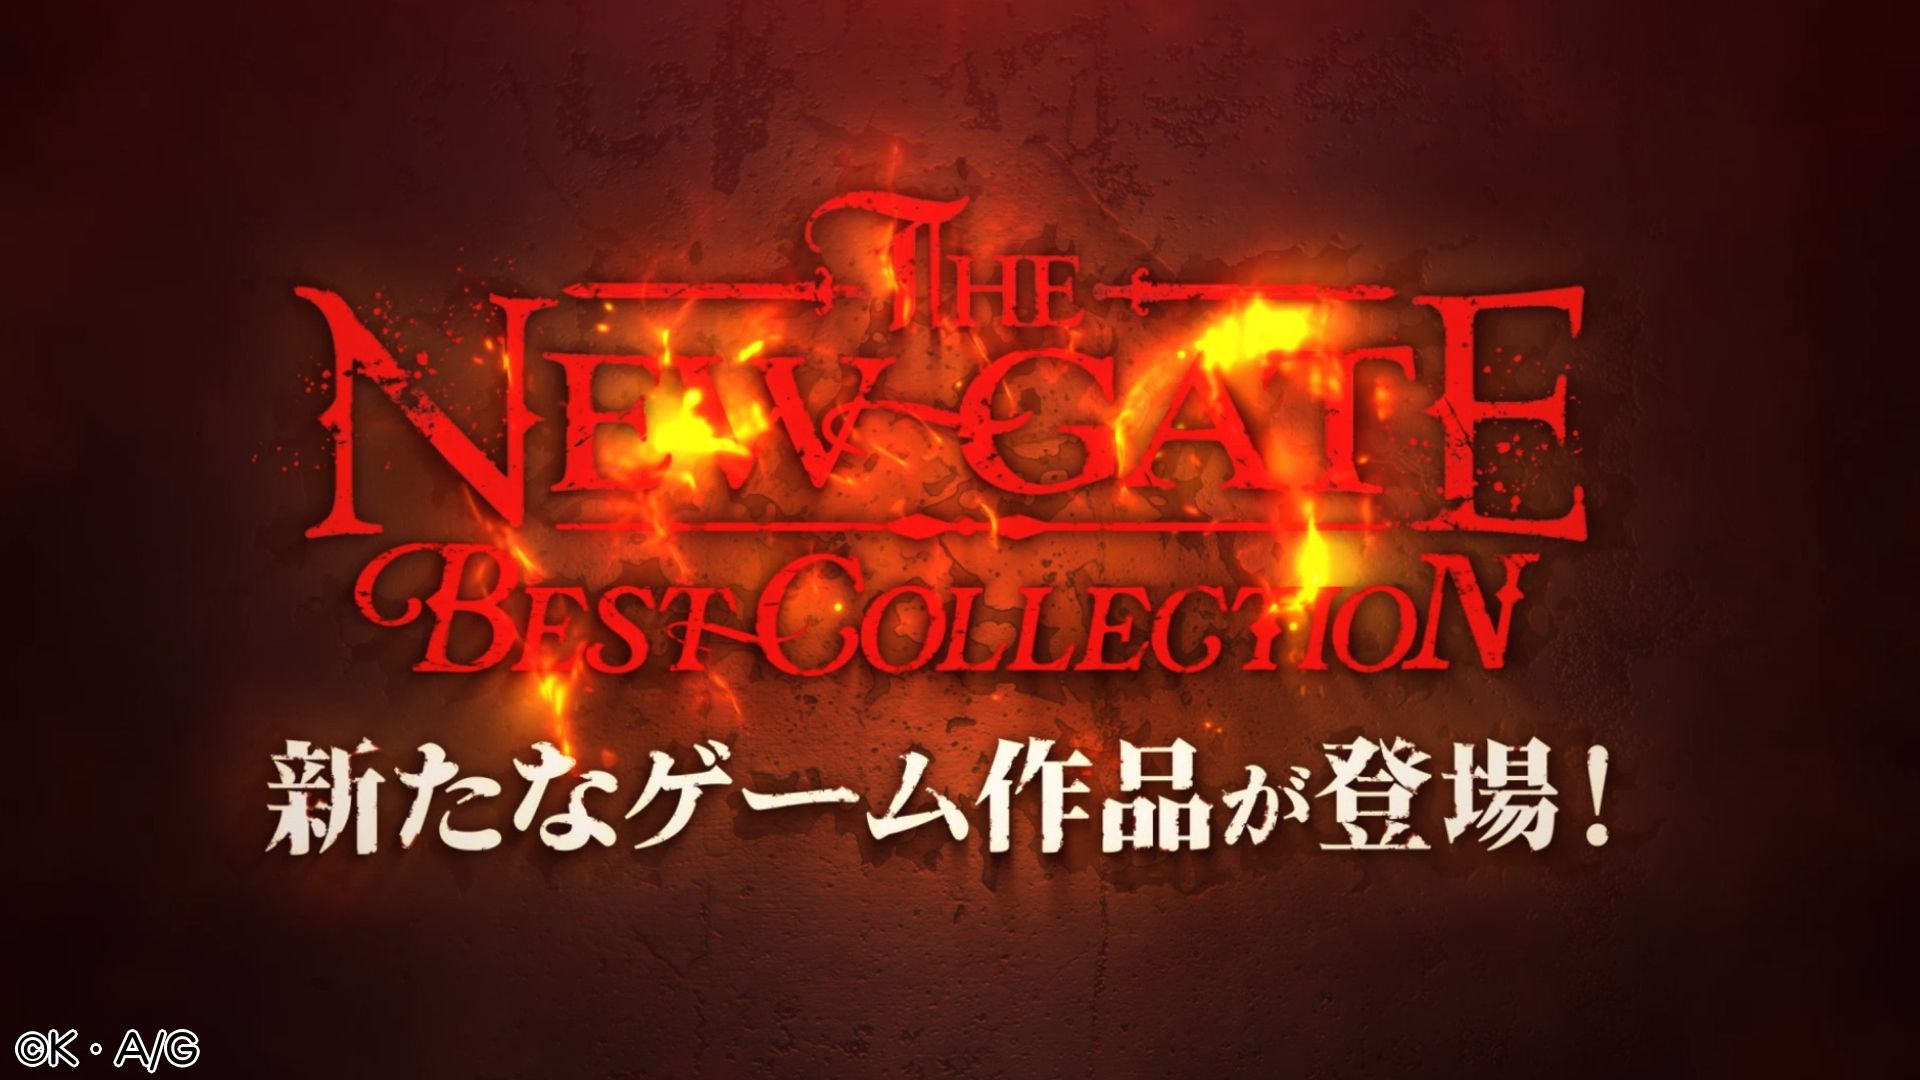 『THE NEW GATE Best Collection』ティザーPV公開！-img-0